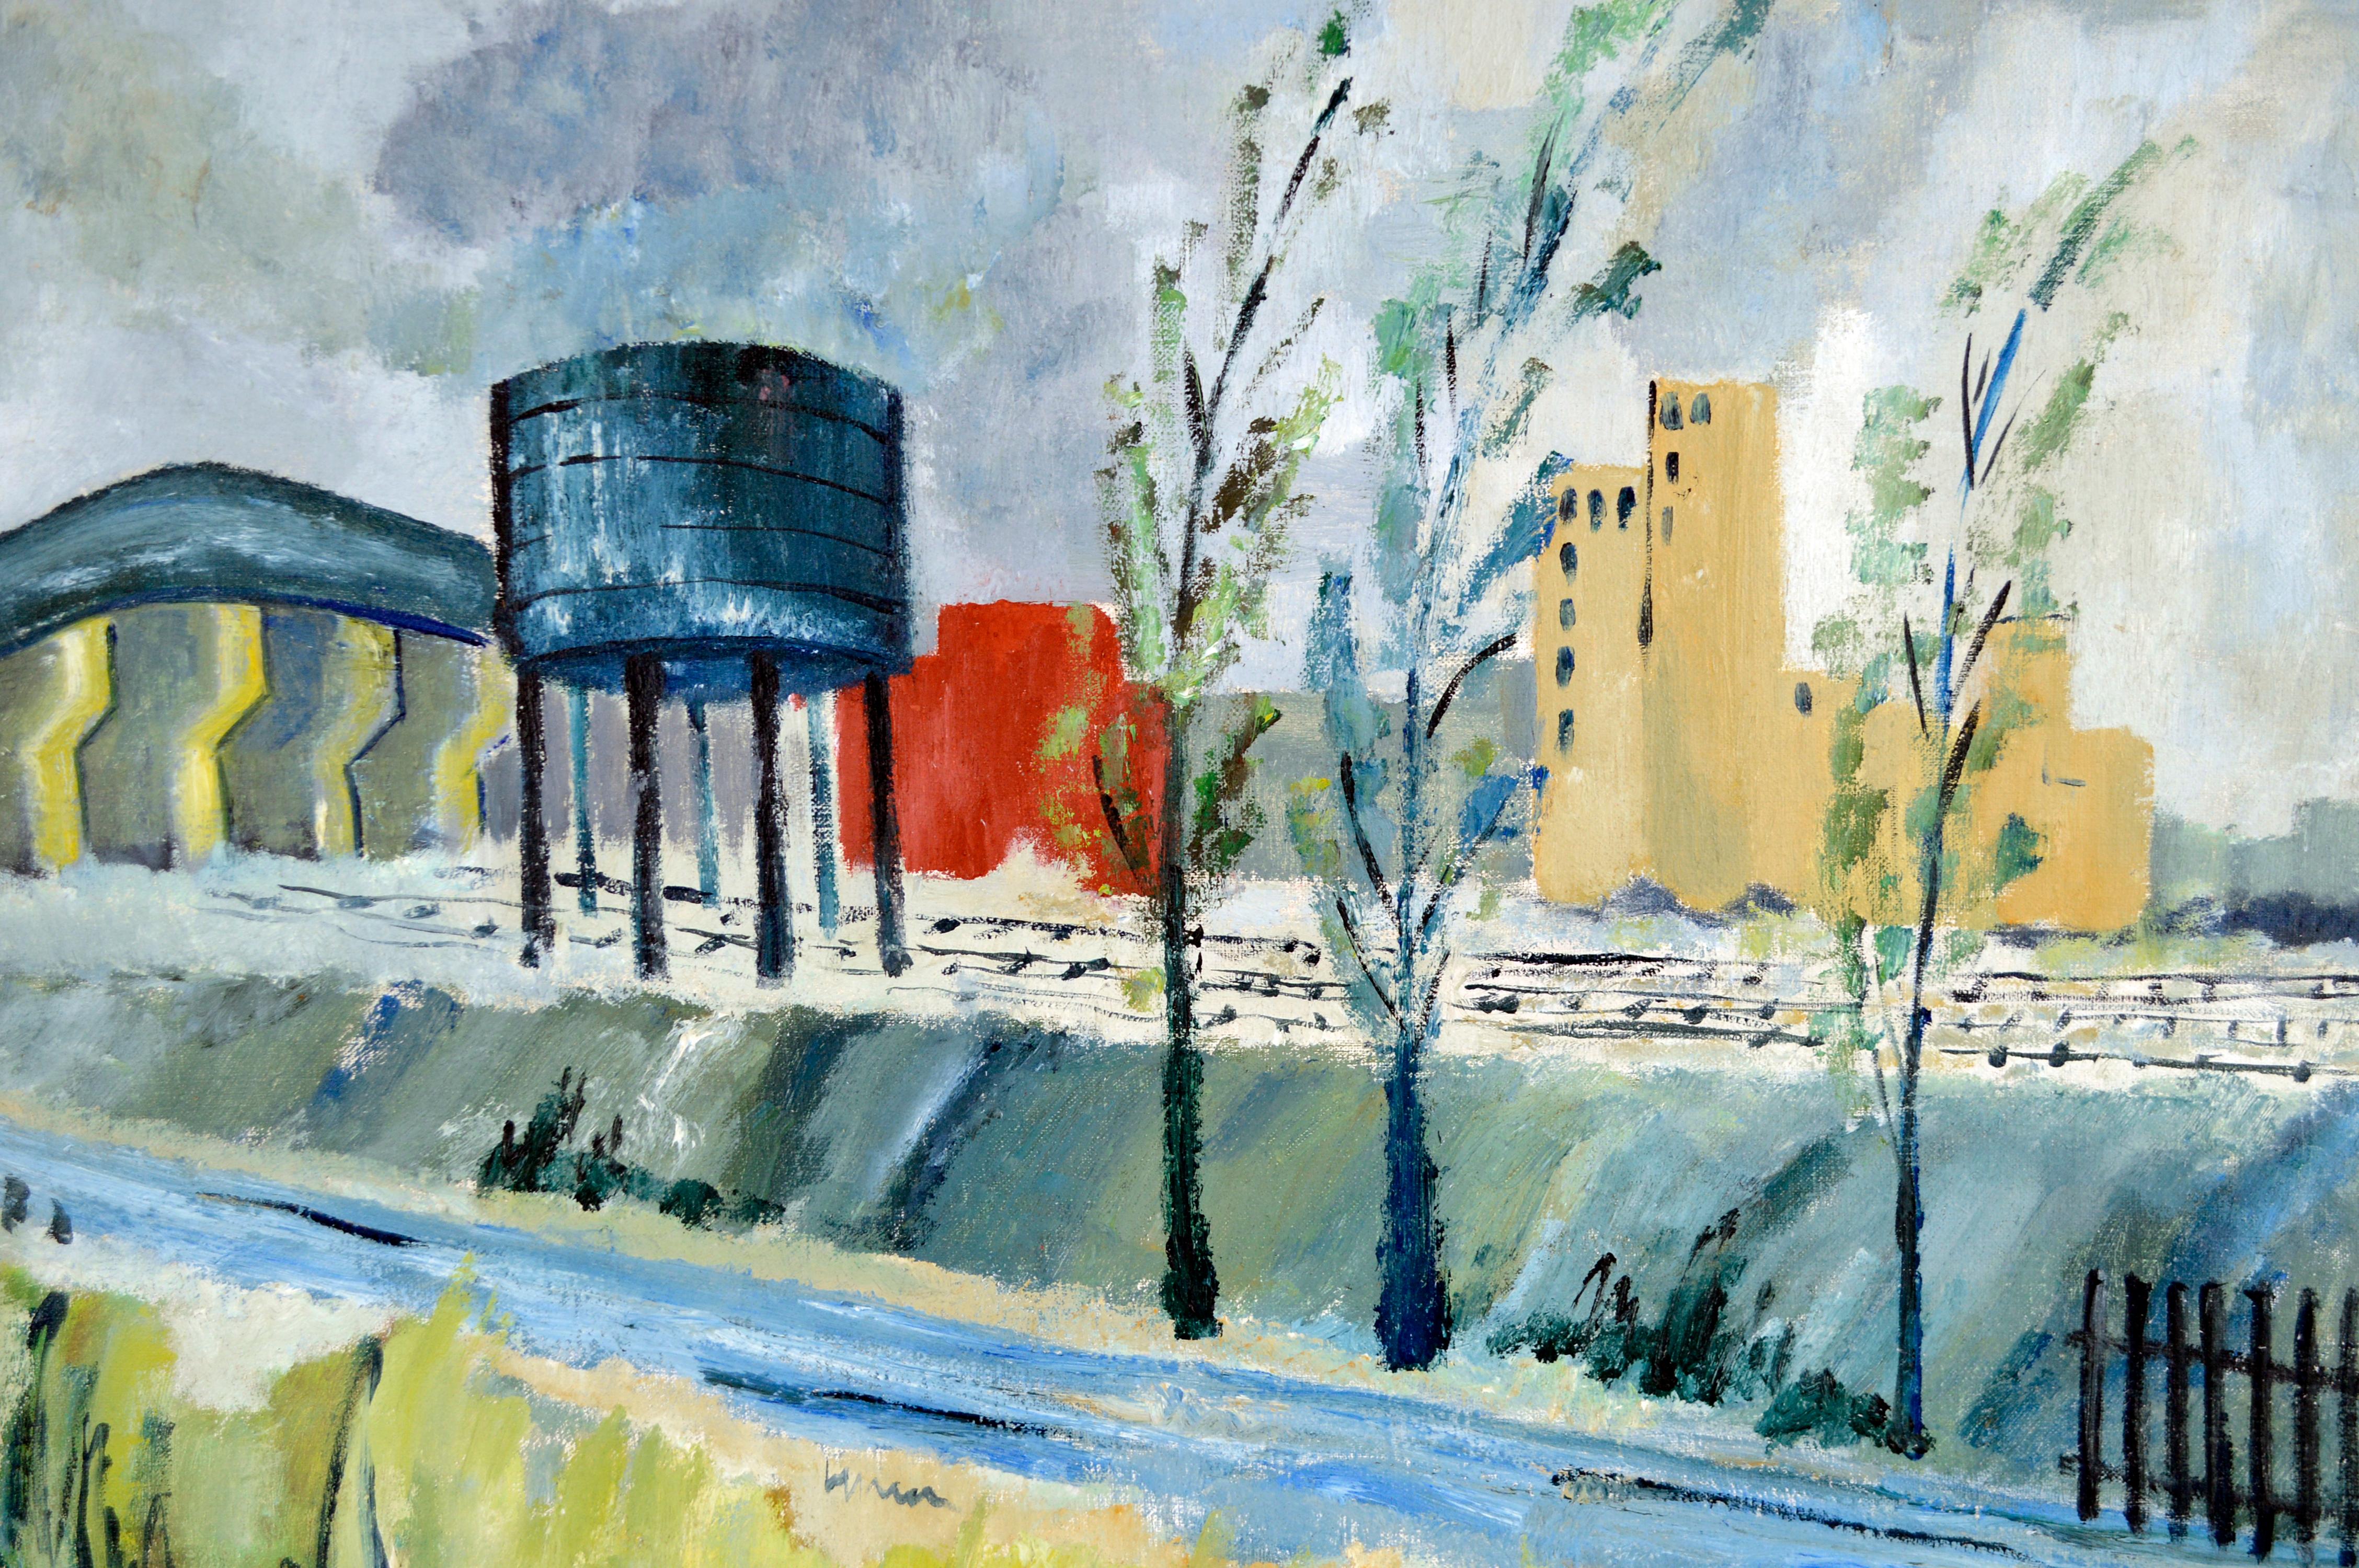 Industrial Landscape with Trees in Oil on Linen - Painting by Doris Lyons Hoover